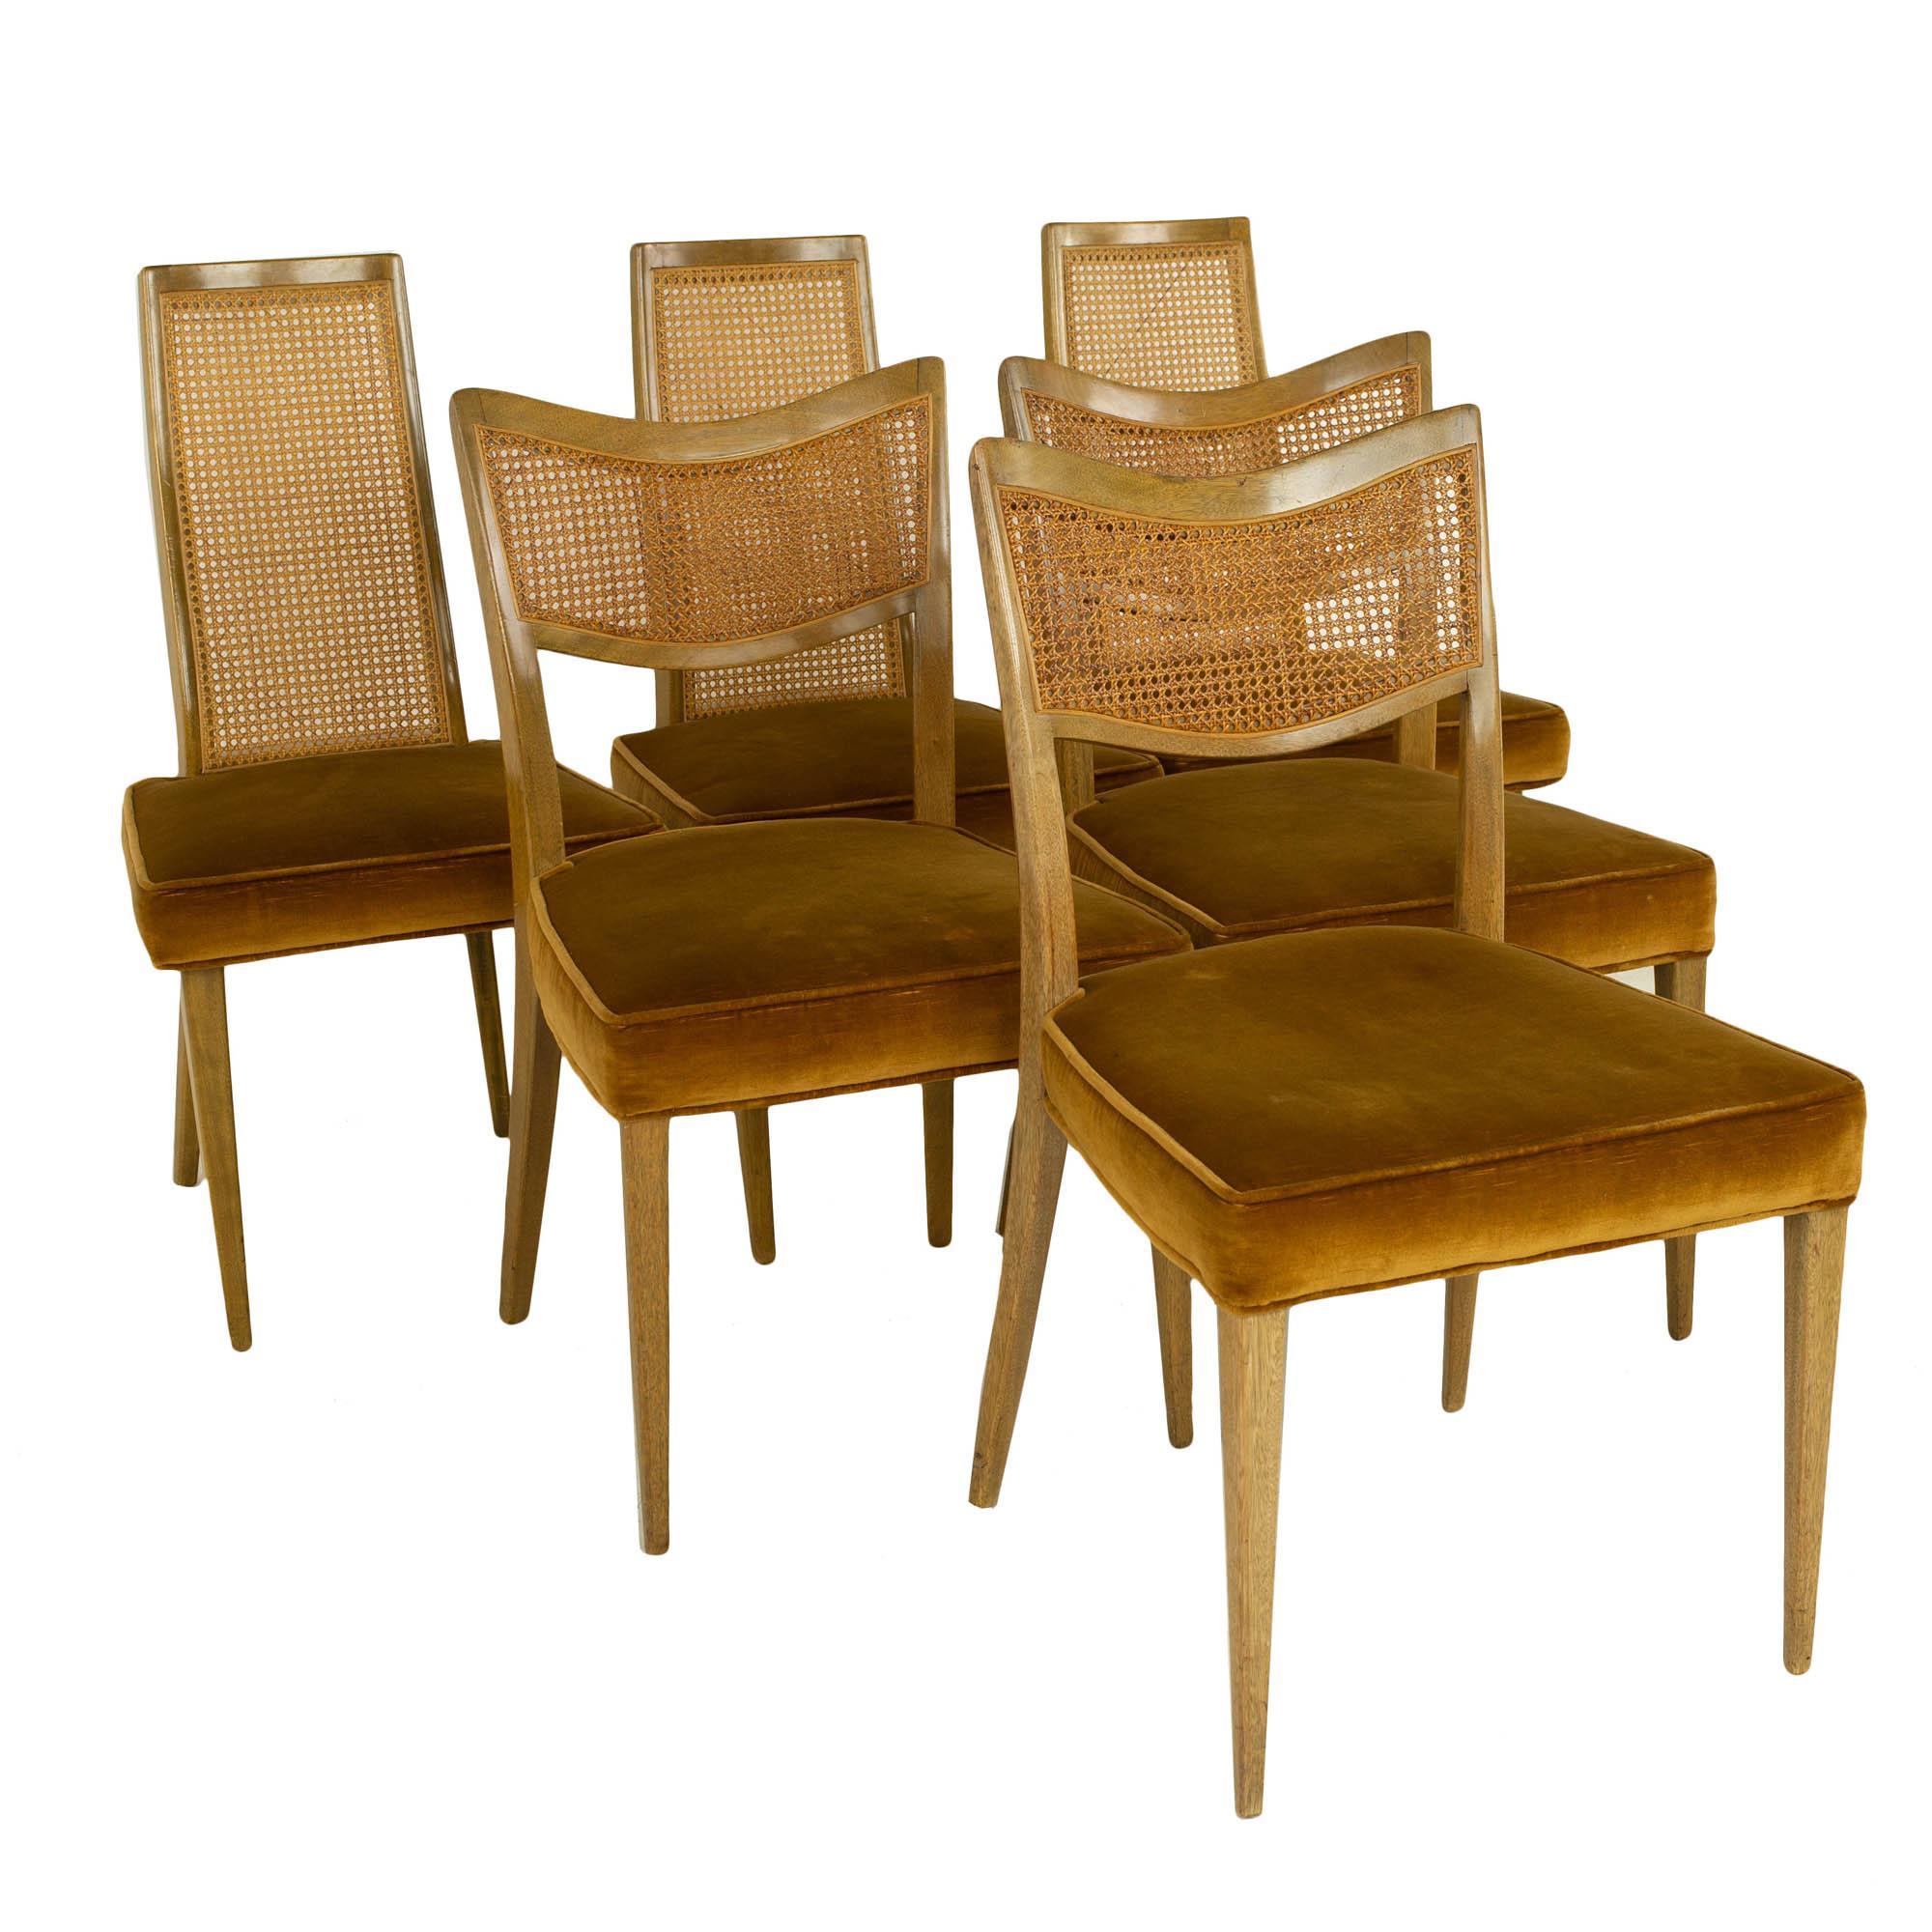 American Draft Harvey Probber MCM Bleached Mahogany and Cane Dining Chairs, Set of 6